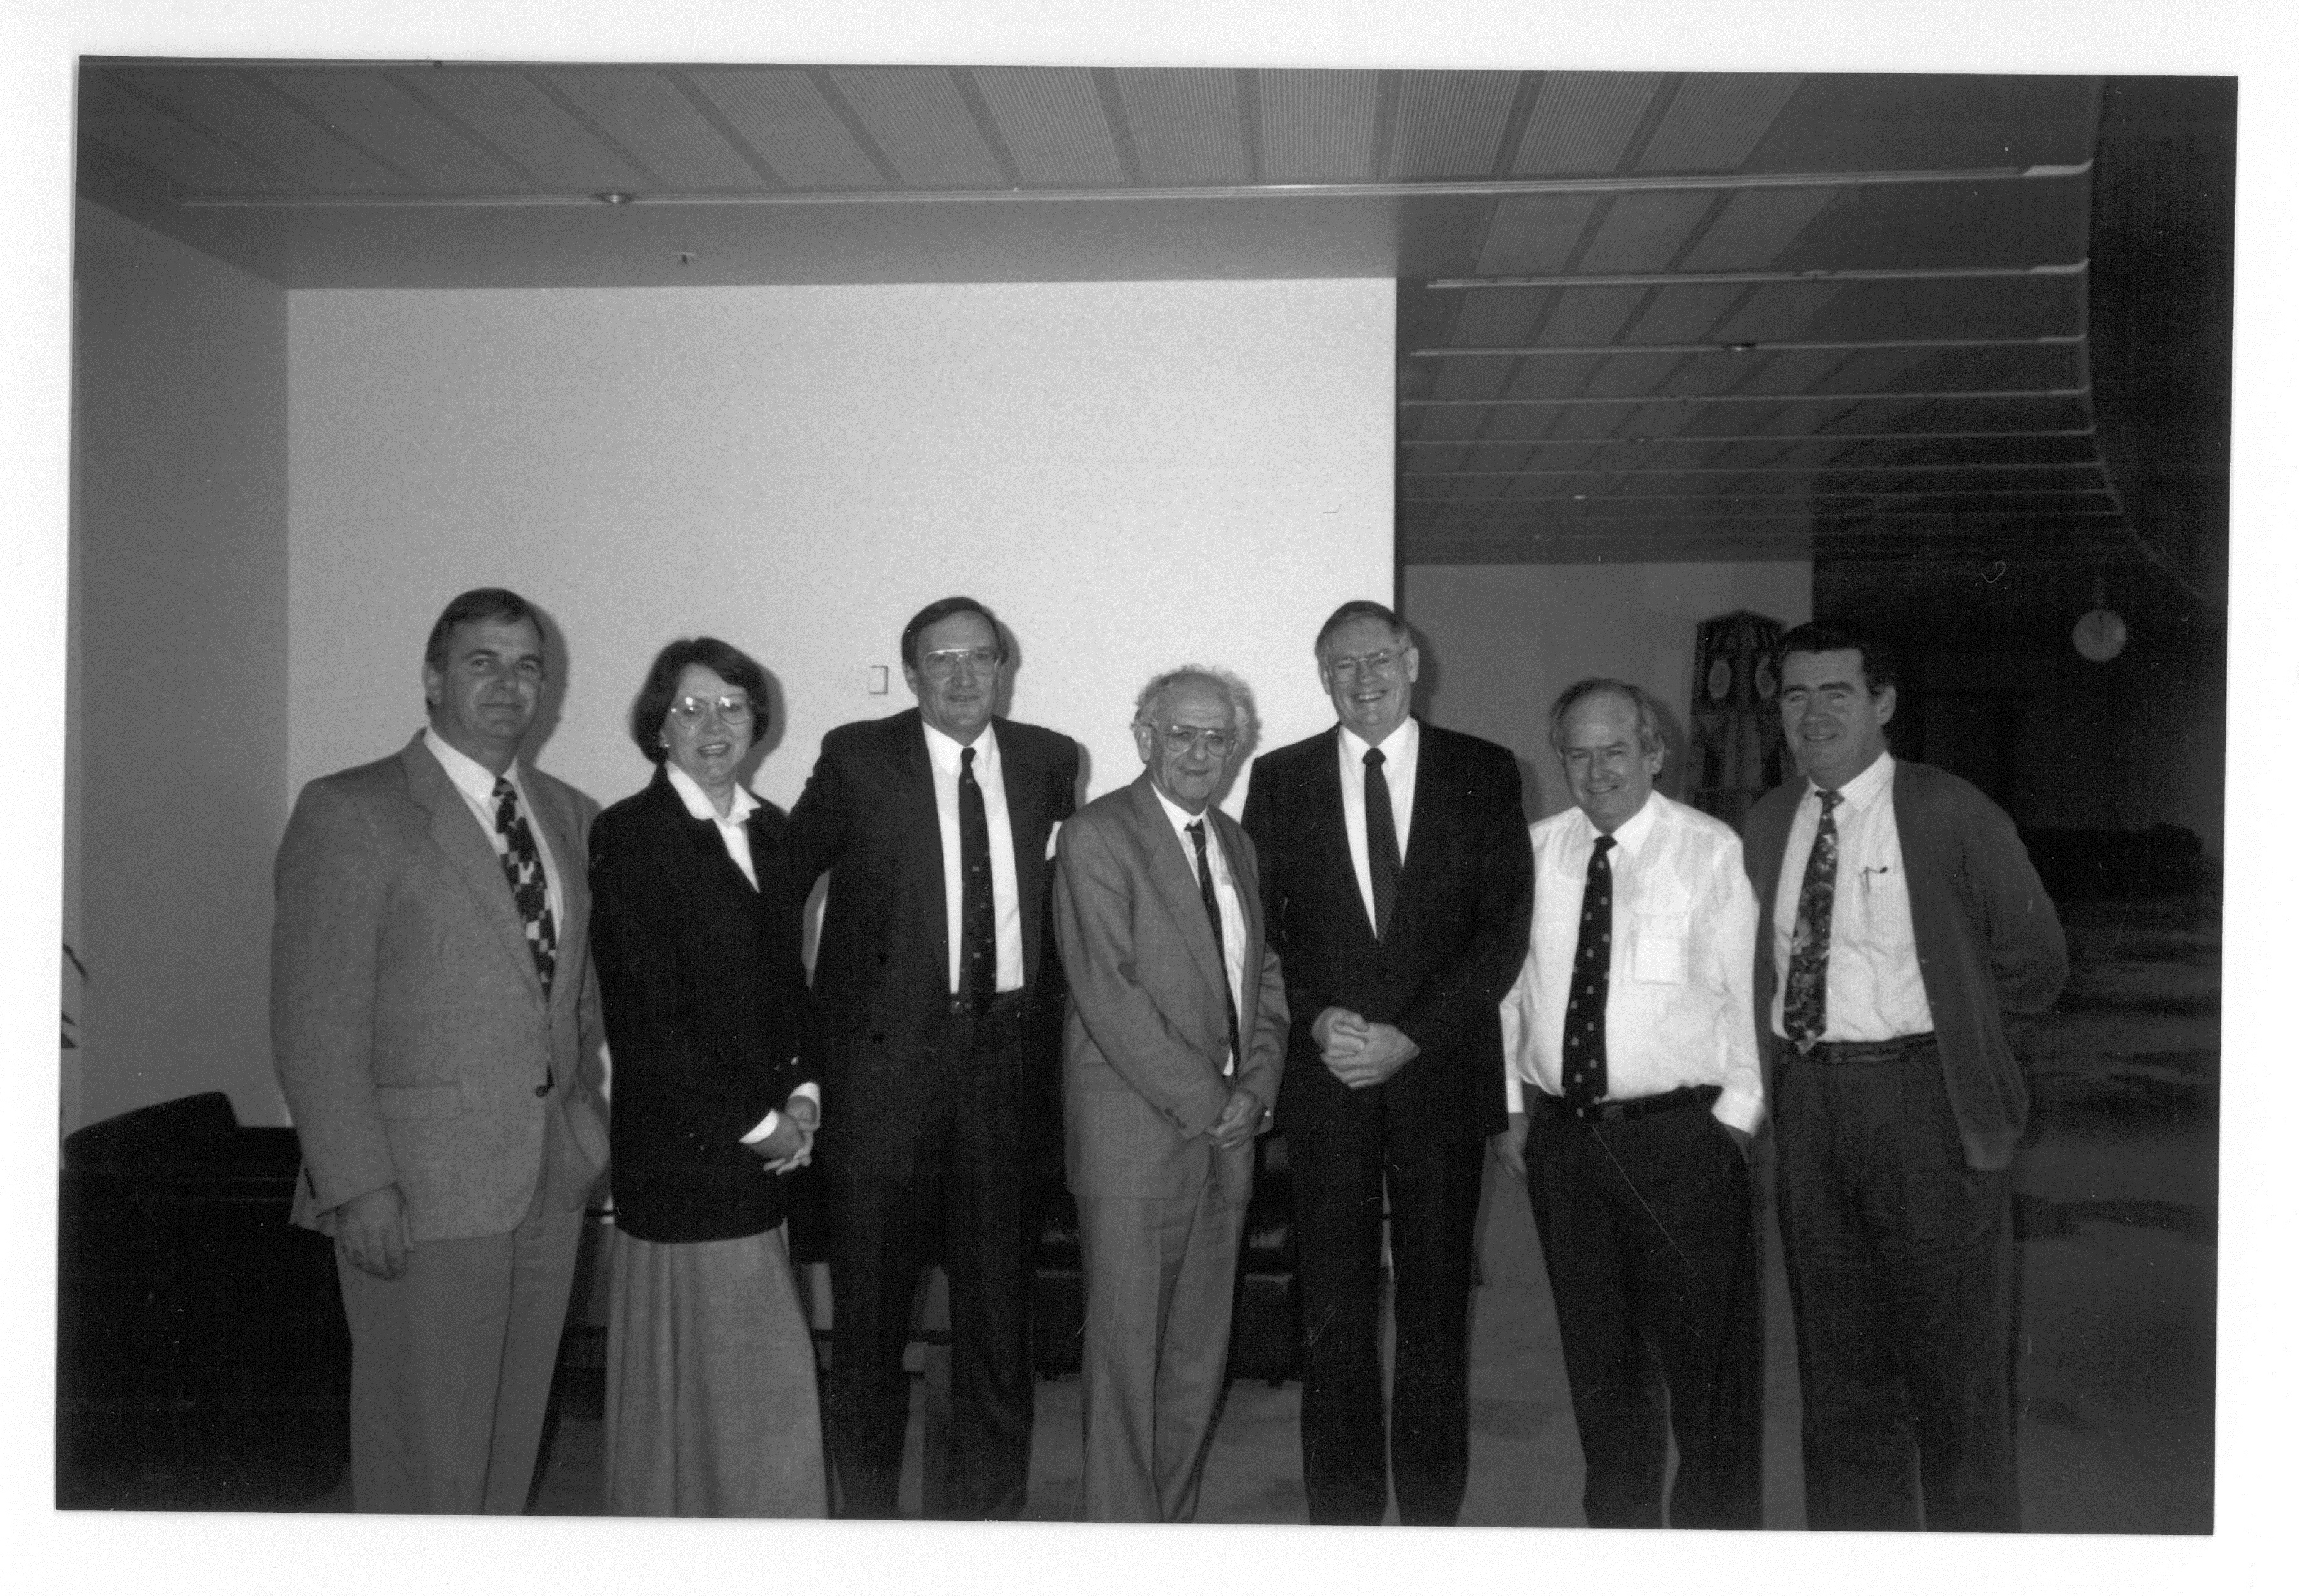 Ted Woodfield, New Zealand's High Commissioner to Australia, with members of the Standing Committee on Rural and Regional Affairs after appearing before a public hearing of its shearing industry employment inquiry, 11 June 1993. L-R: Senators Paul Calvert, Sue West, David Brownhill [Deputy Chair] and Bryant Burns [Chair], High Commissioner Ted Woodfield, Senators Winston Crane and Jim McKiernan.